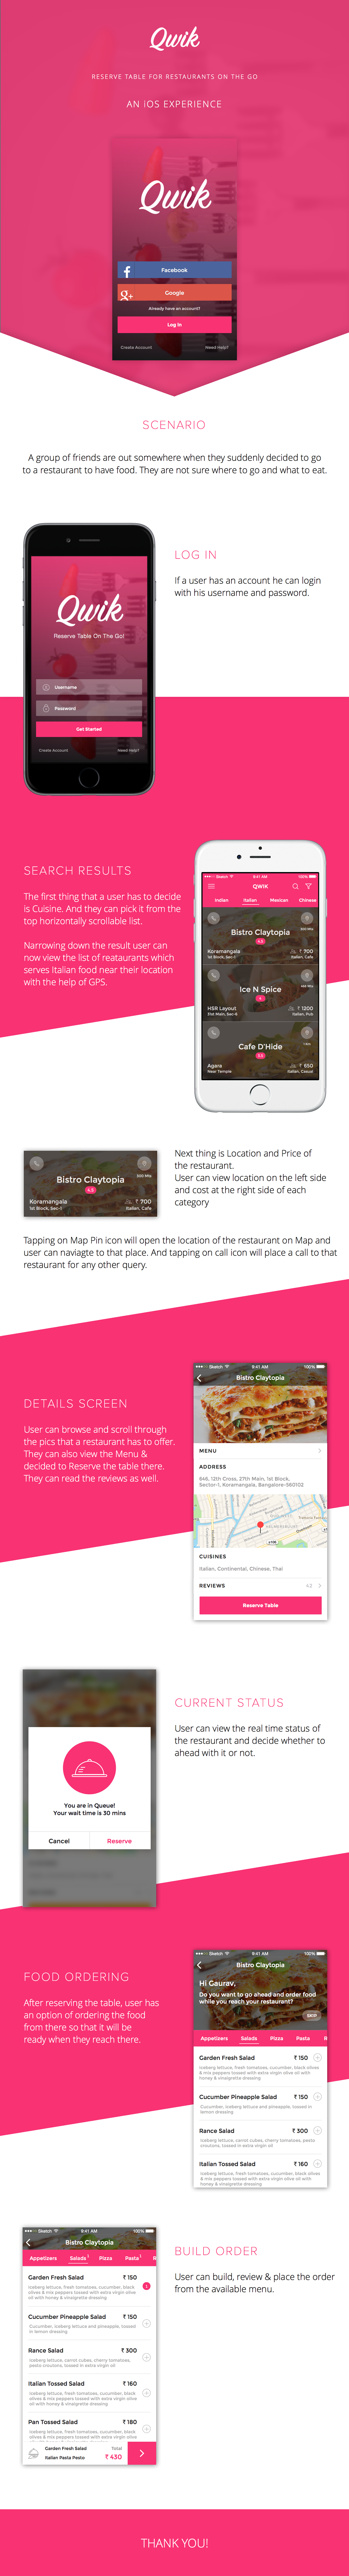 food ordering Mobile app Reserve Table ios 9 on the go ios iosup